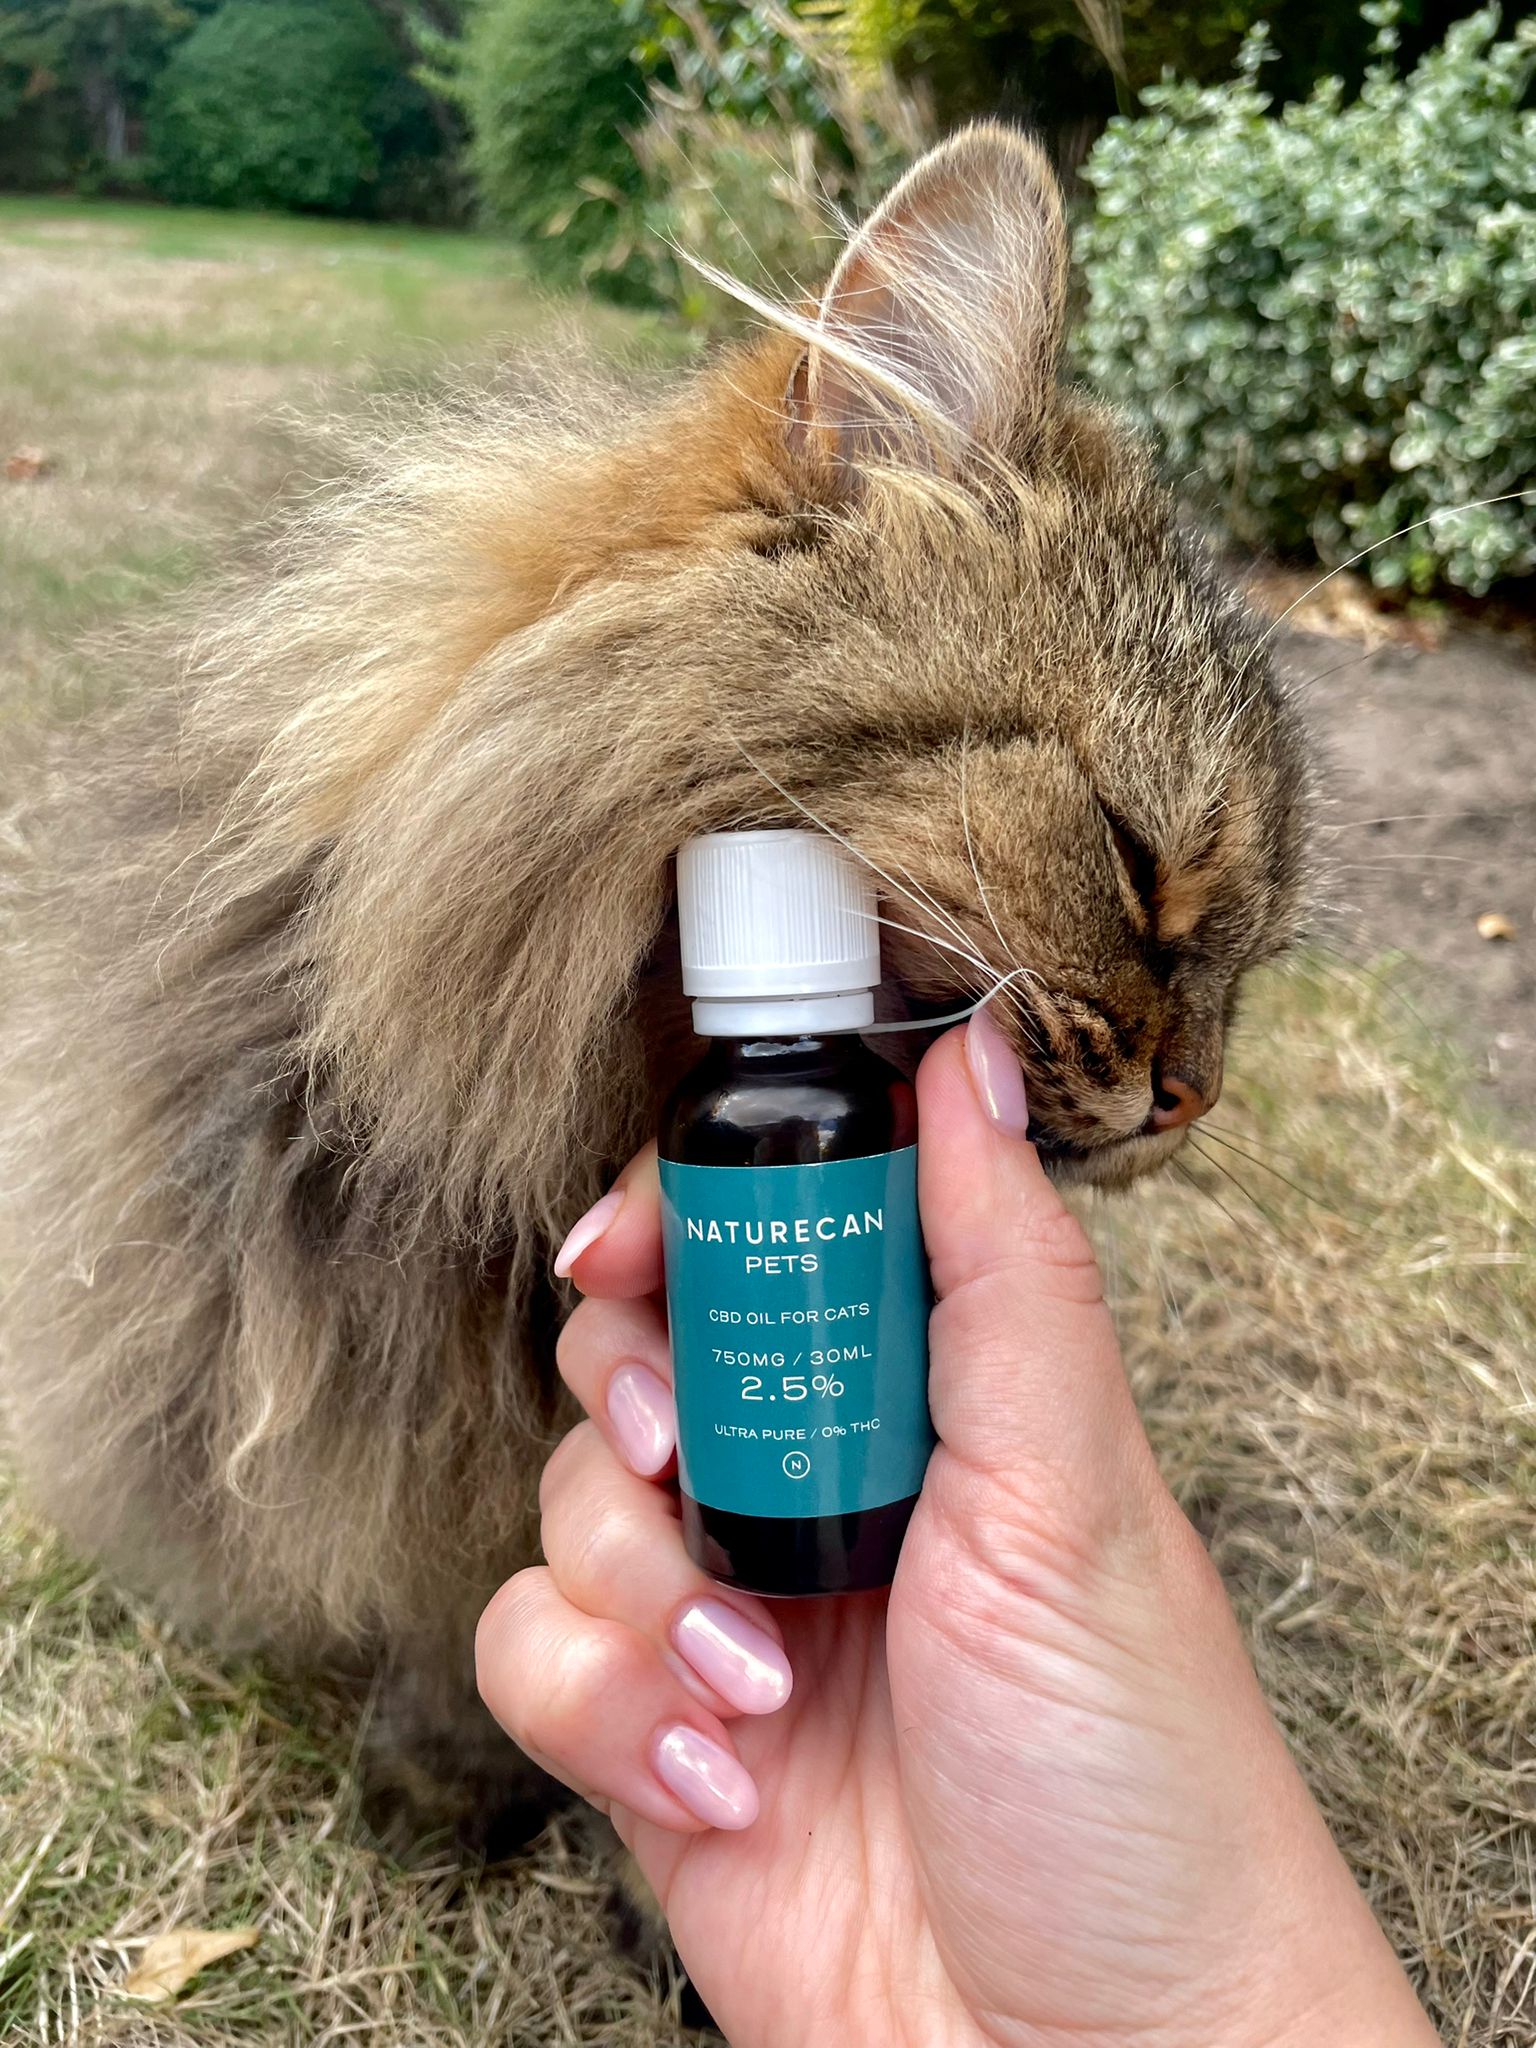 Lady holding CBD oil for cats and cat cuddling her hand